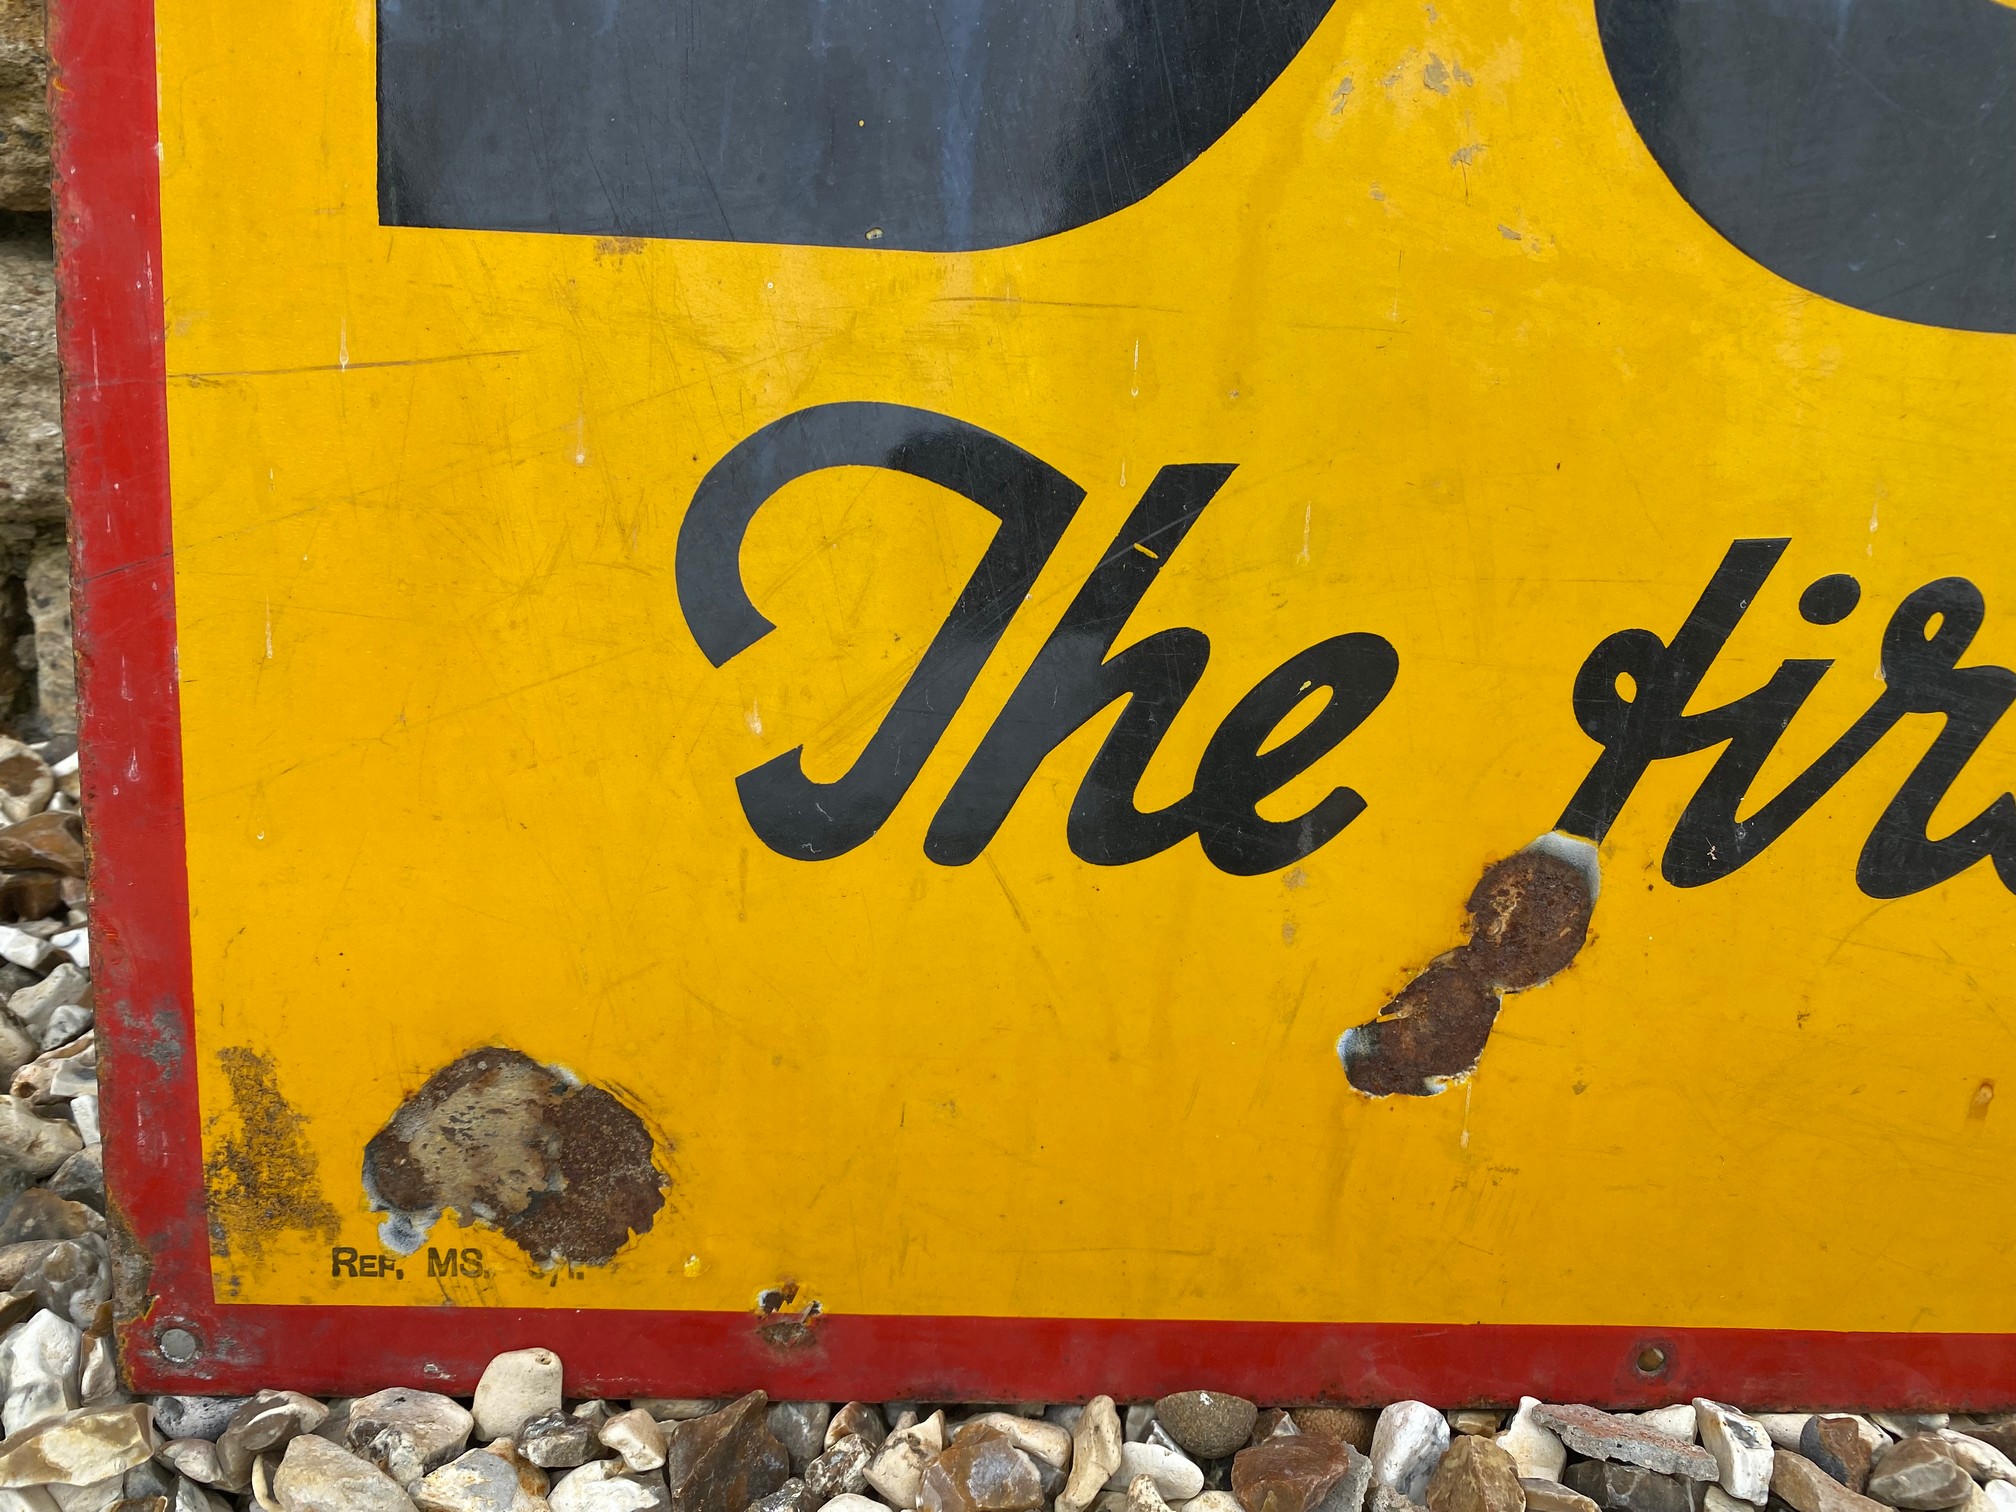 A Dunlop 'The first tyre in the world' rectangular enamel sign by Jordan of Bilston, 48 x 36". - Image 2 of 5